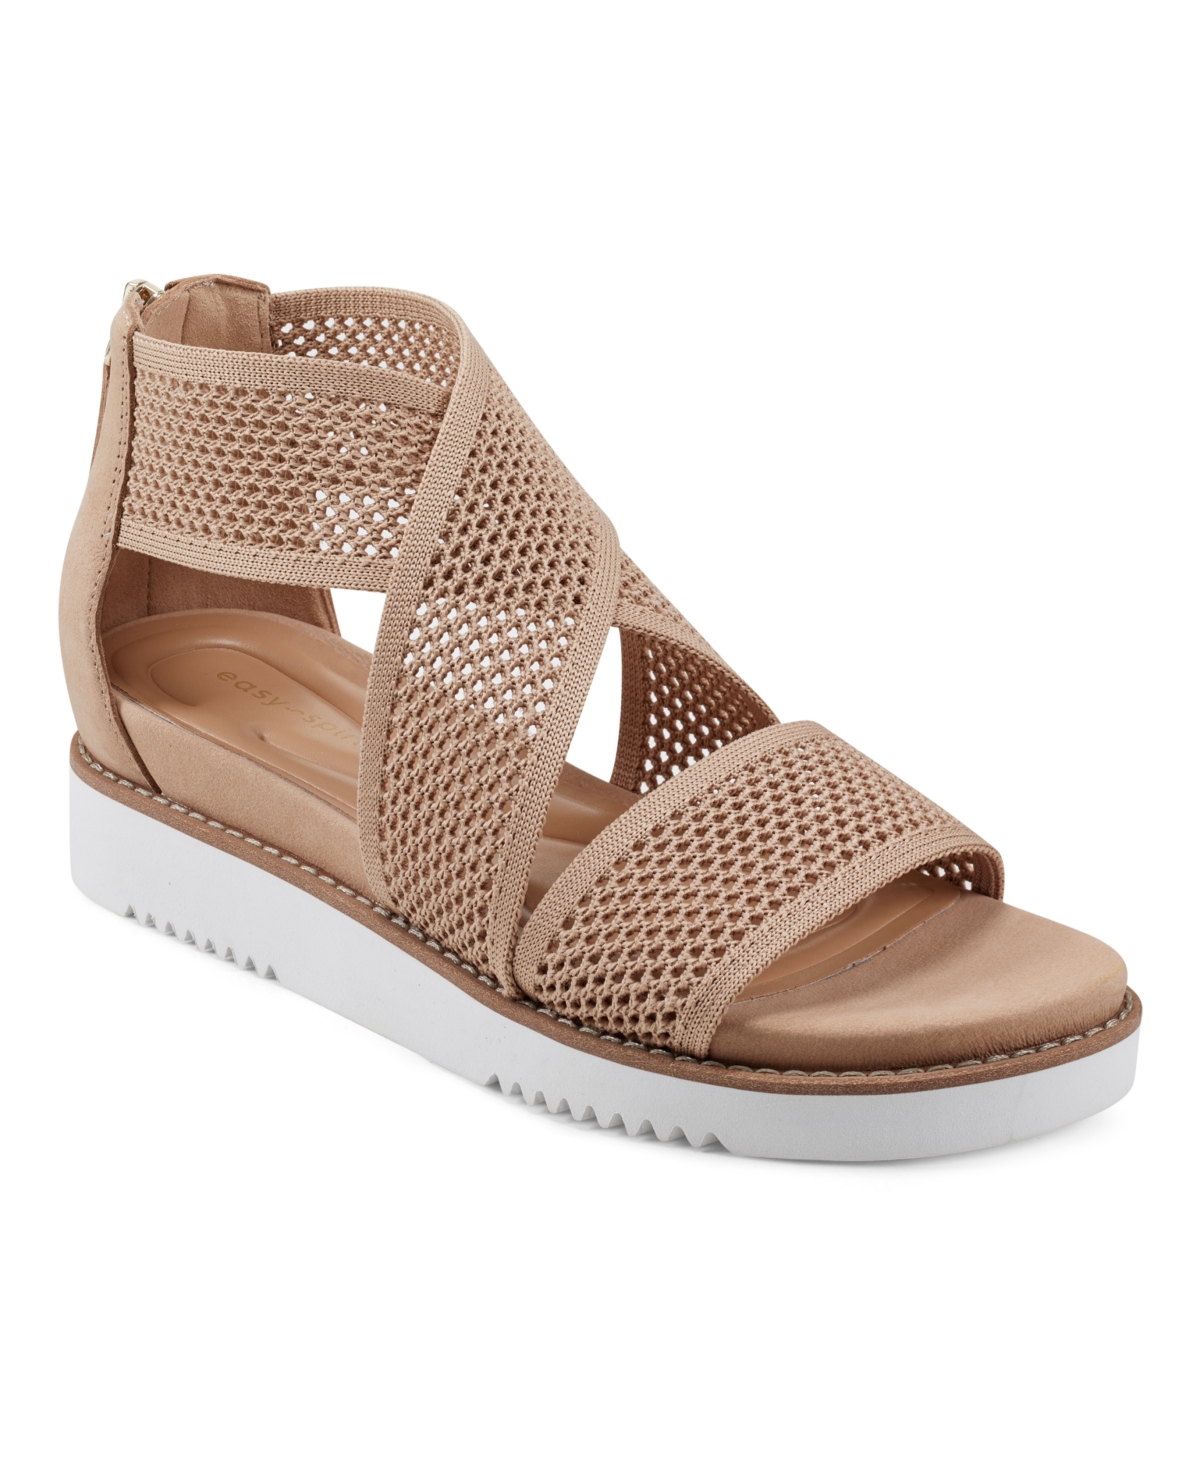 Women's Wander Round Toe Strappy Casual Sandals - Light Natural